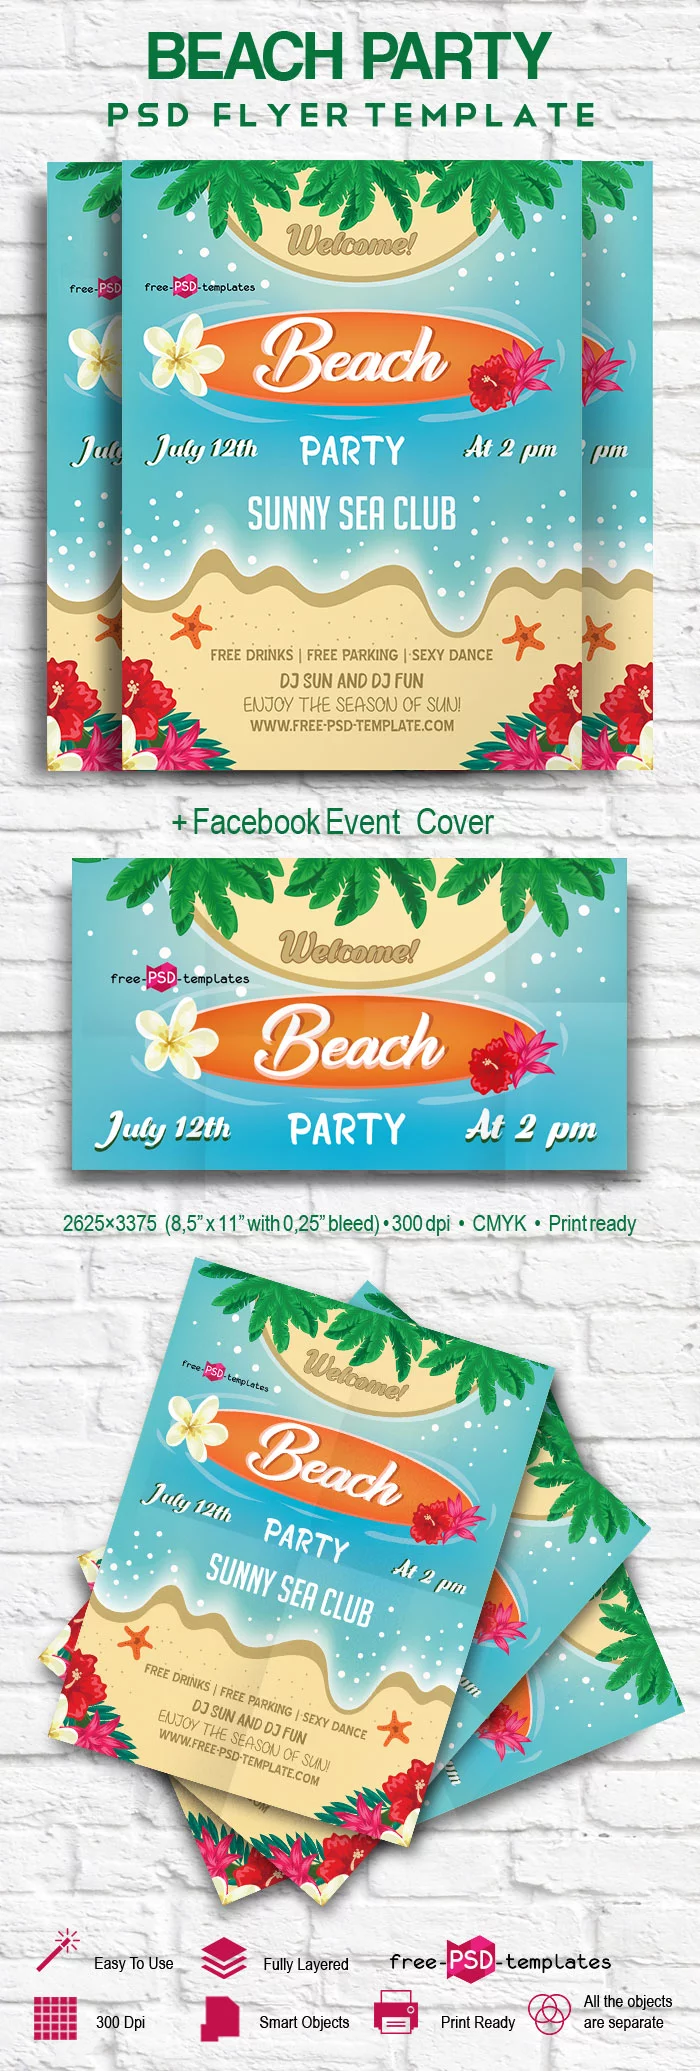 Free Beach Party Flyer in PSD